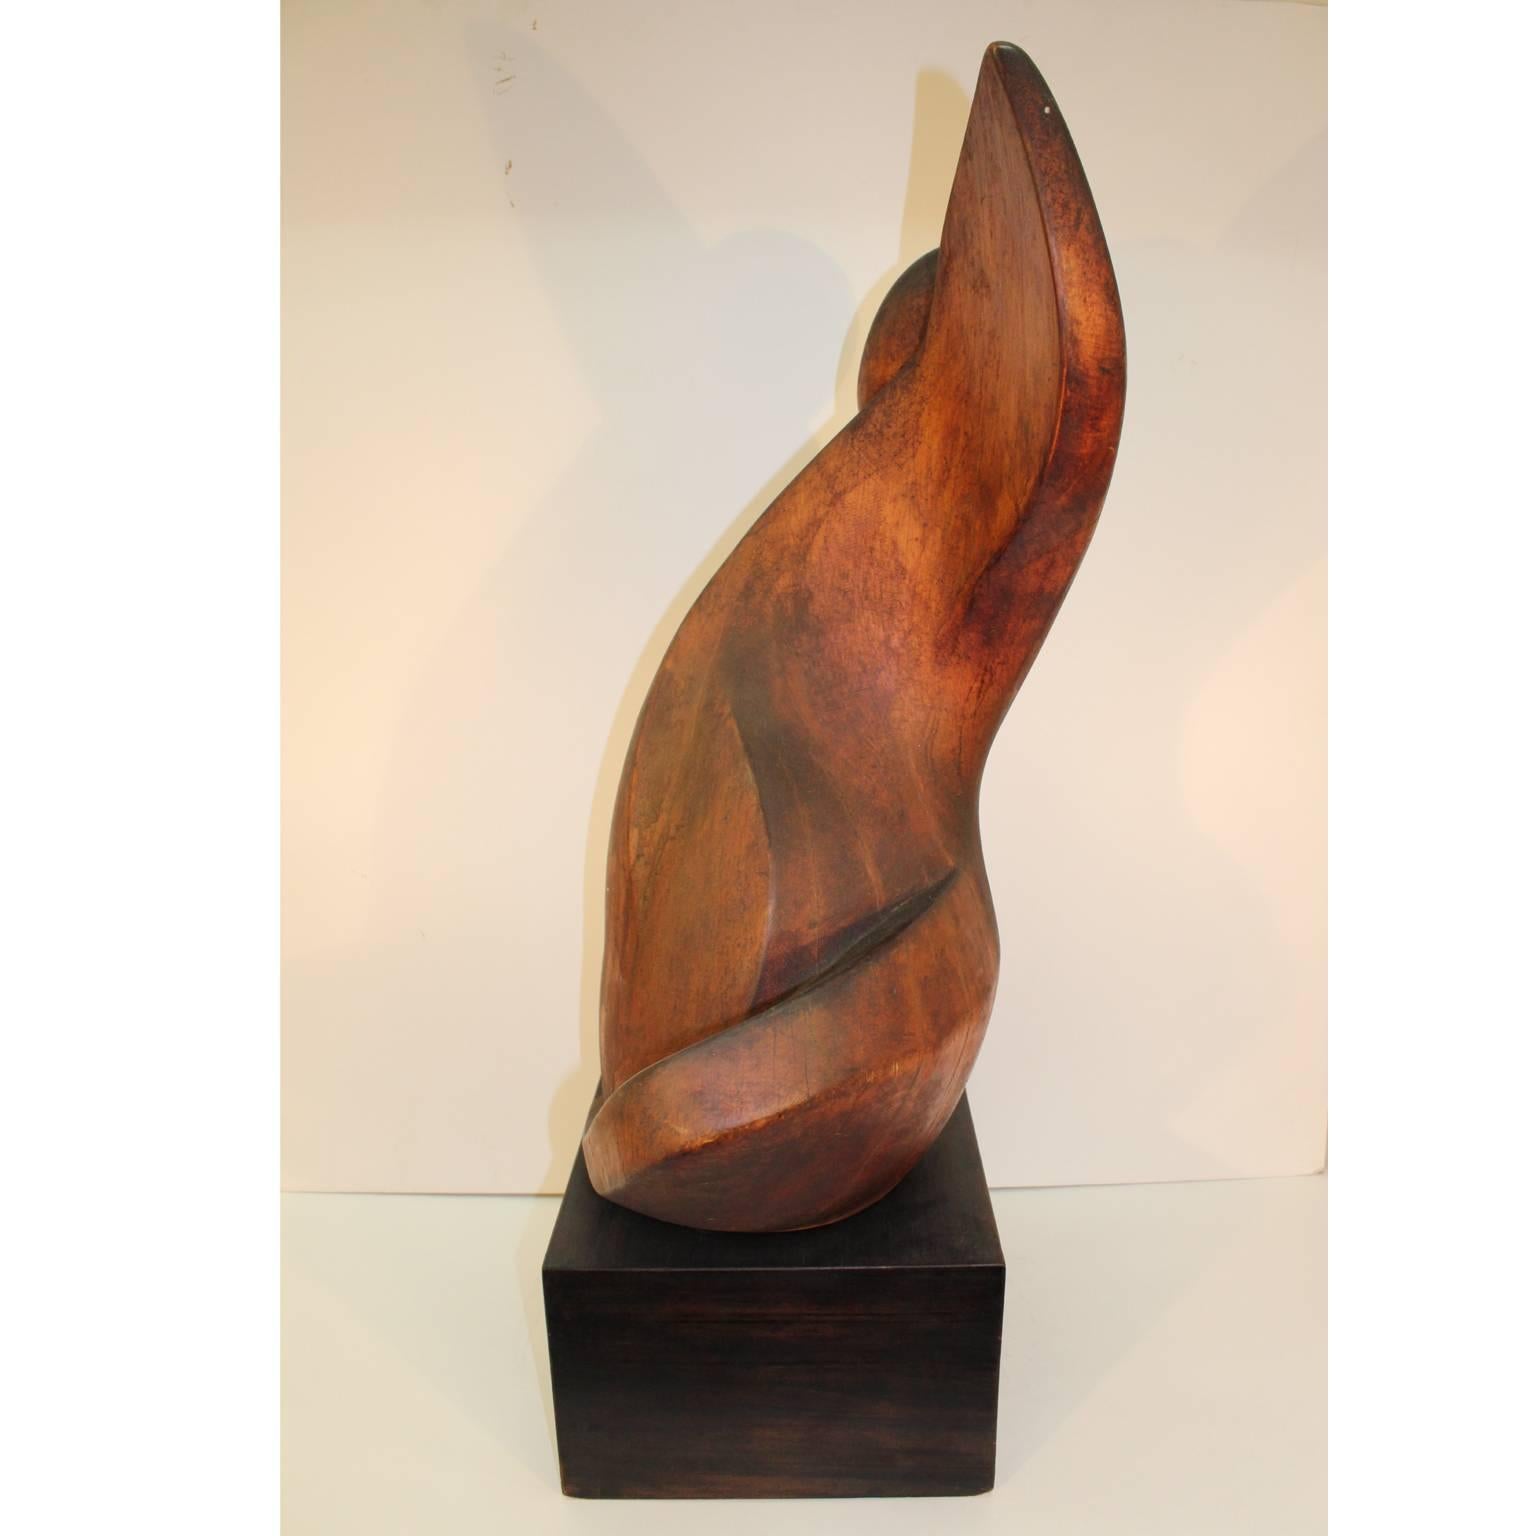 American Martinek Carved Walnut Abstract Cello Player Sculpture